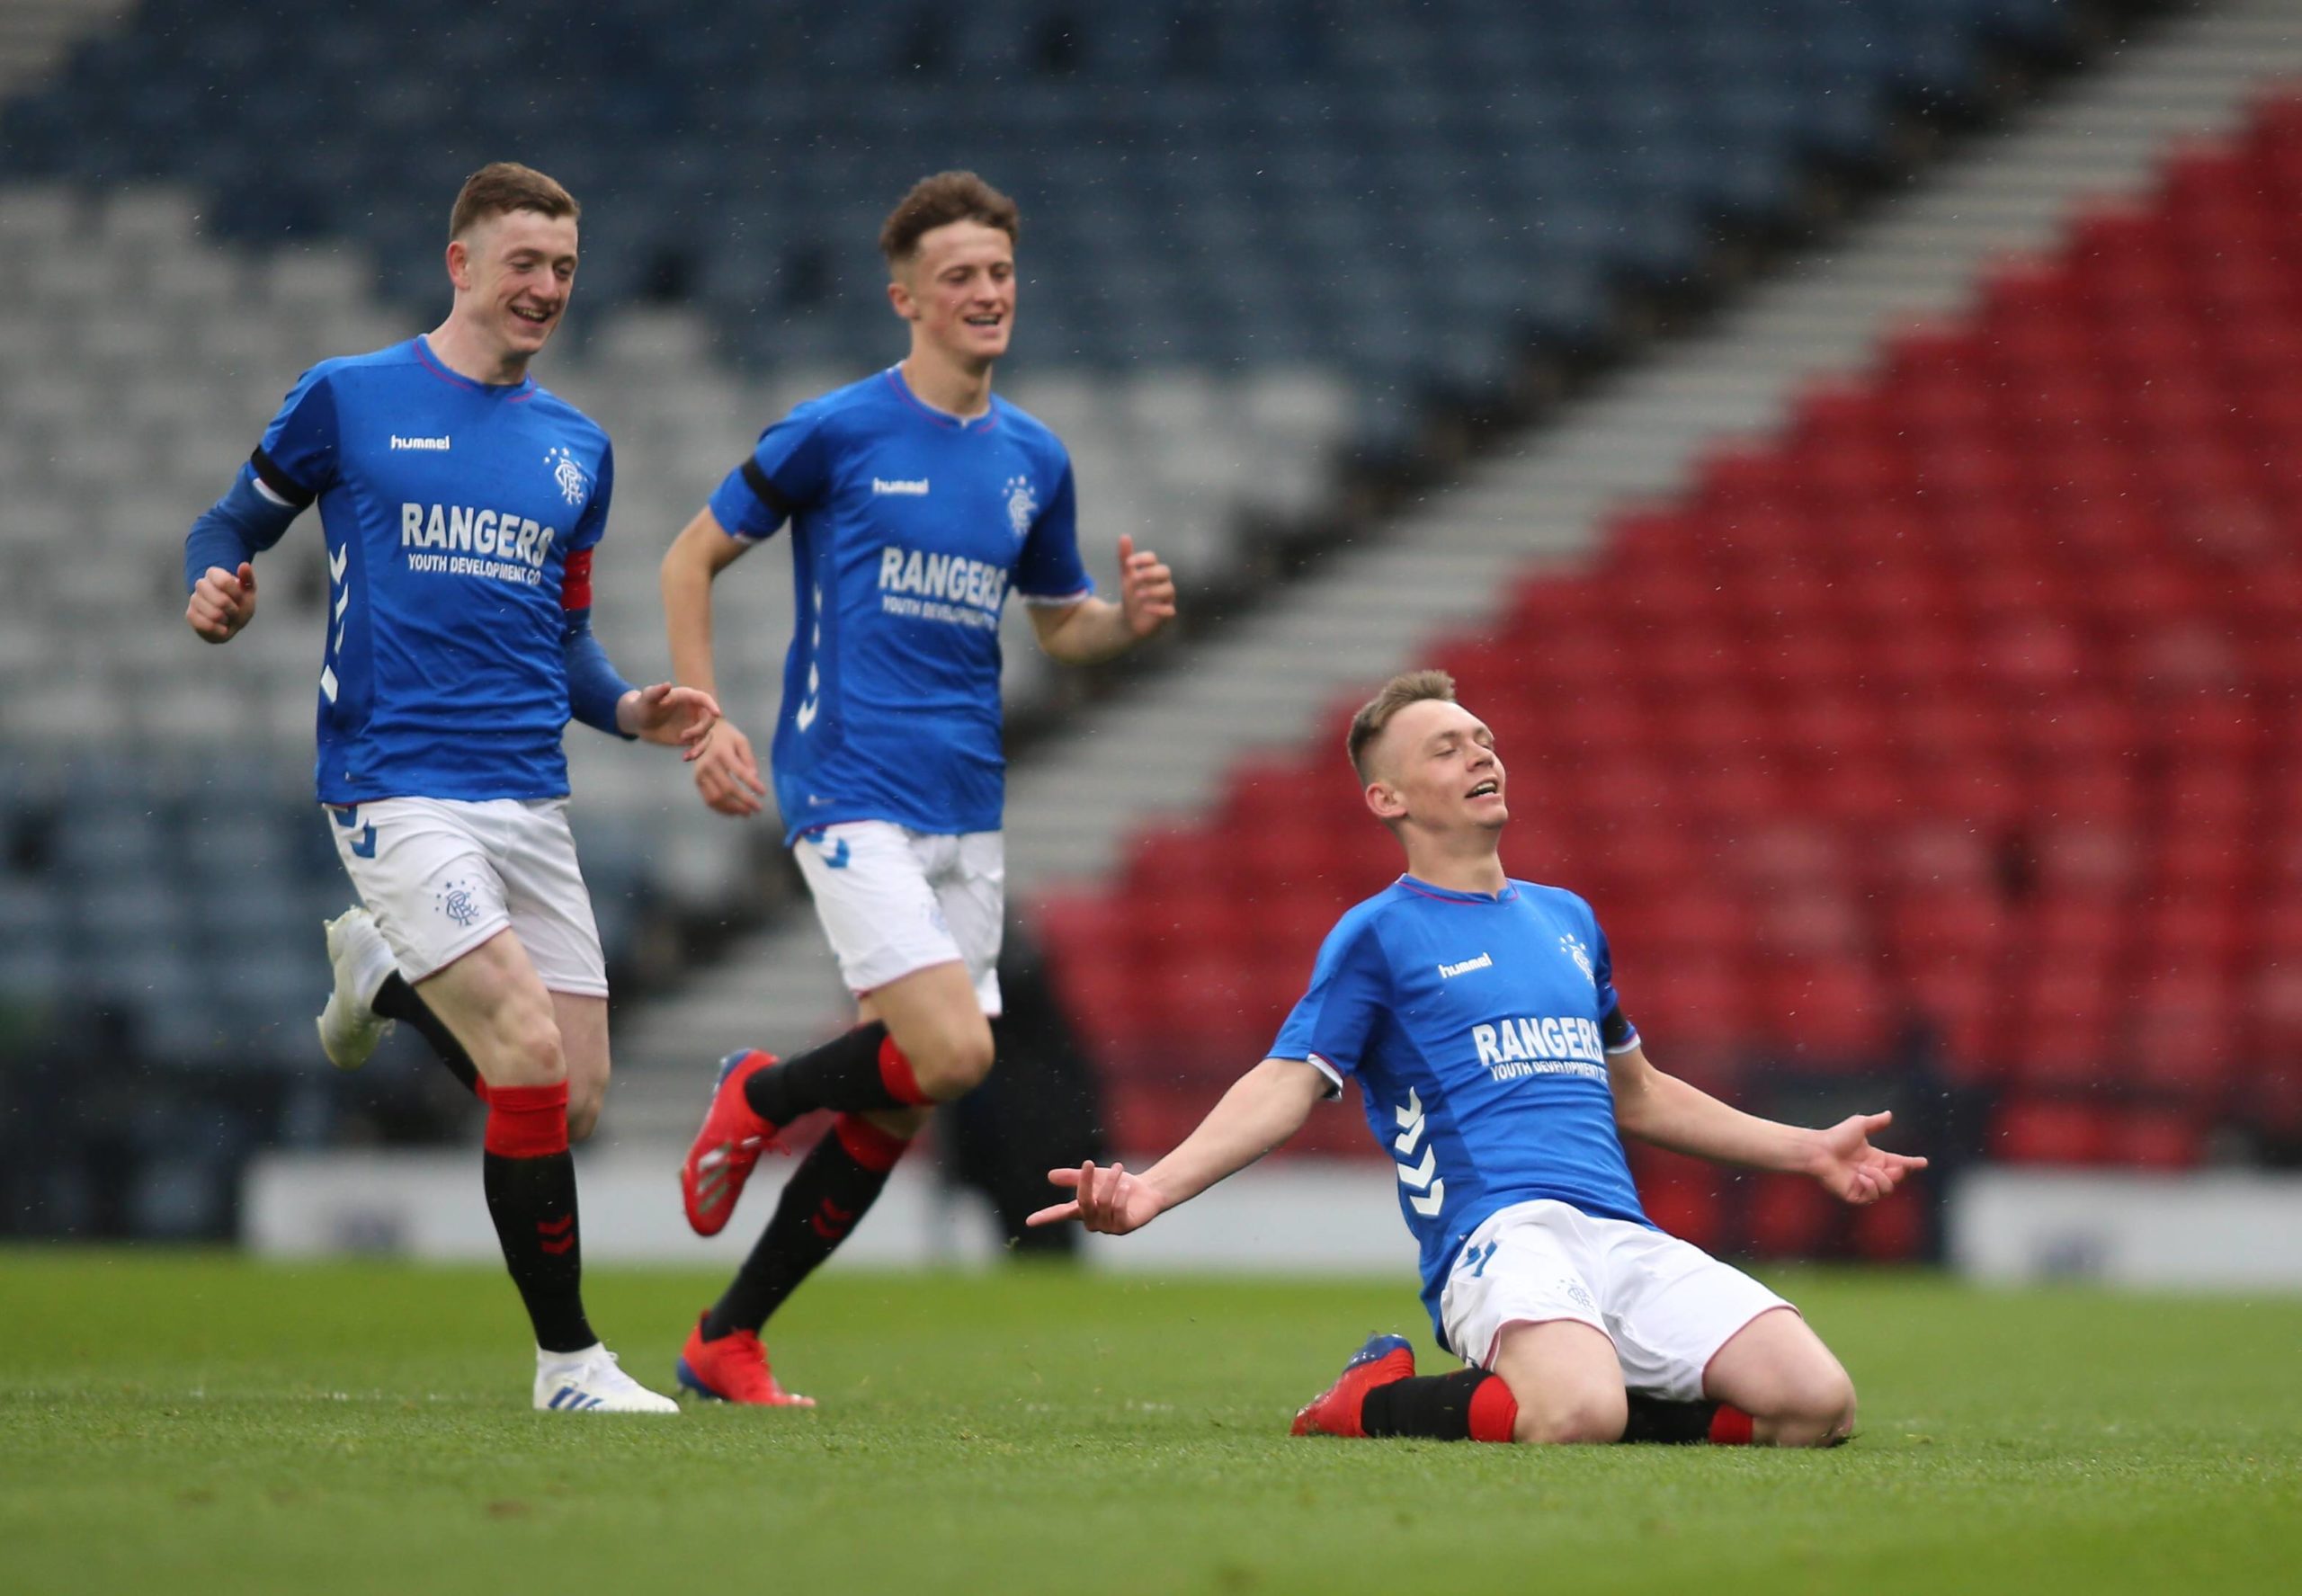 Celtic youngster Ciaran Dickson celebrating a goal from his Rangers days